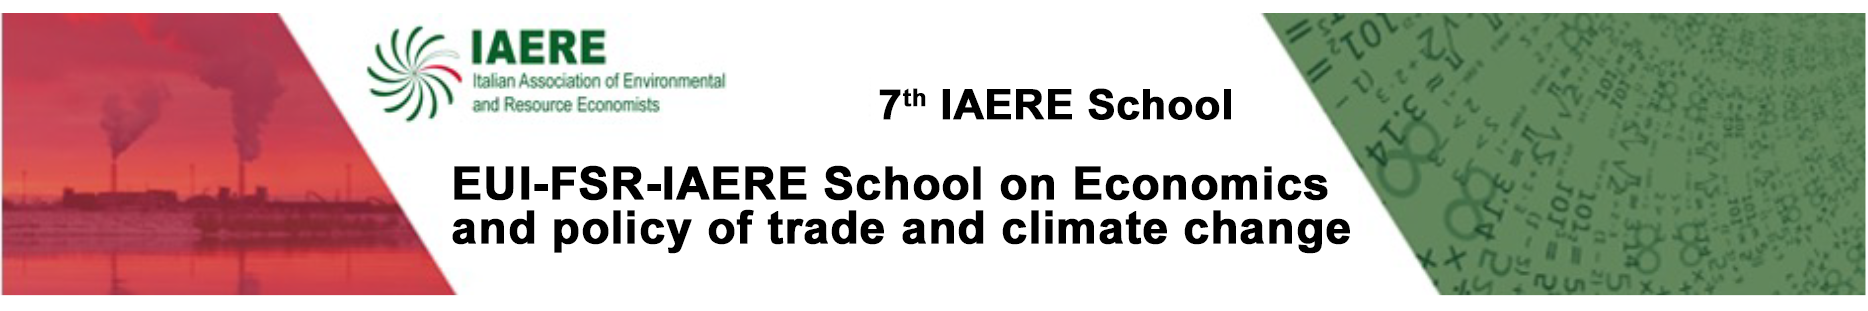 7th IAERE School EUI-FSR-IAERE School on Economics and policy of trade and climate change